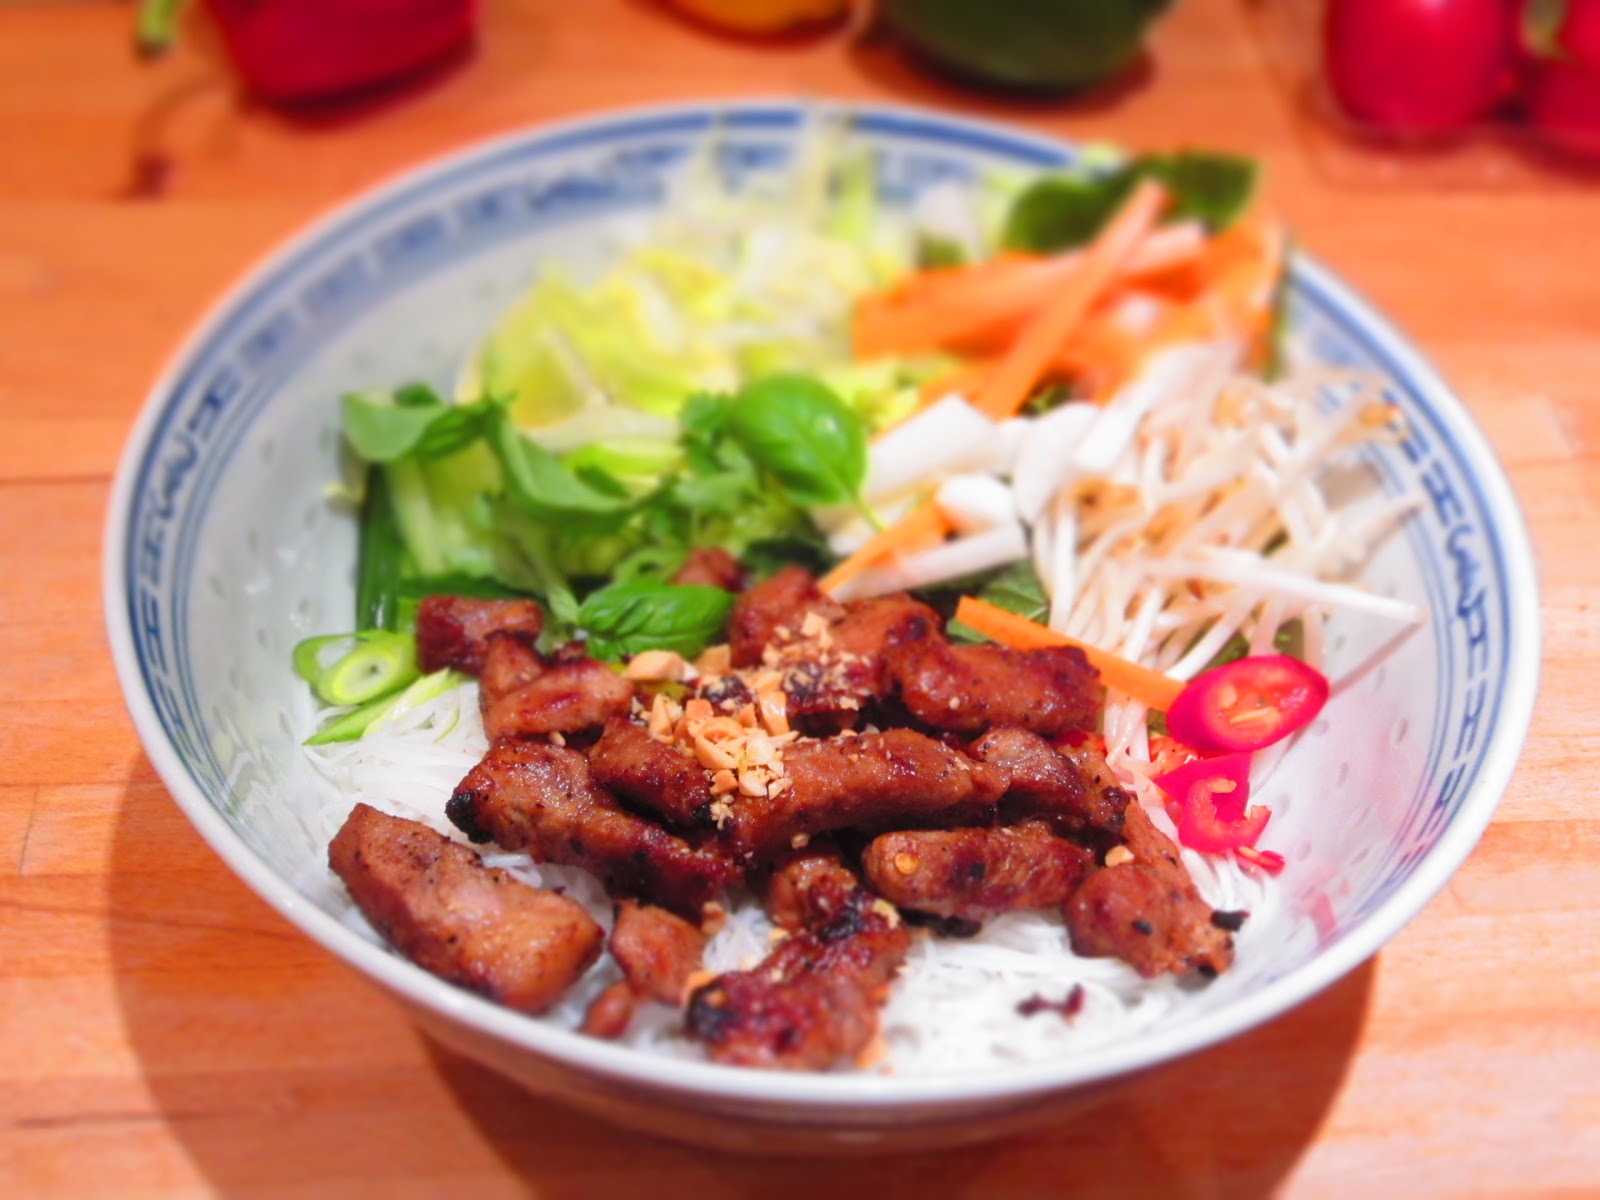 Busy Eating Bun Thit Nuong Vietnamese Grilled Pork With Vermicelli